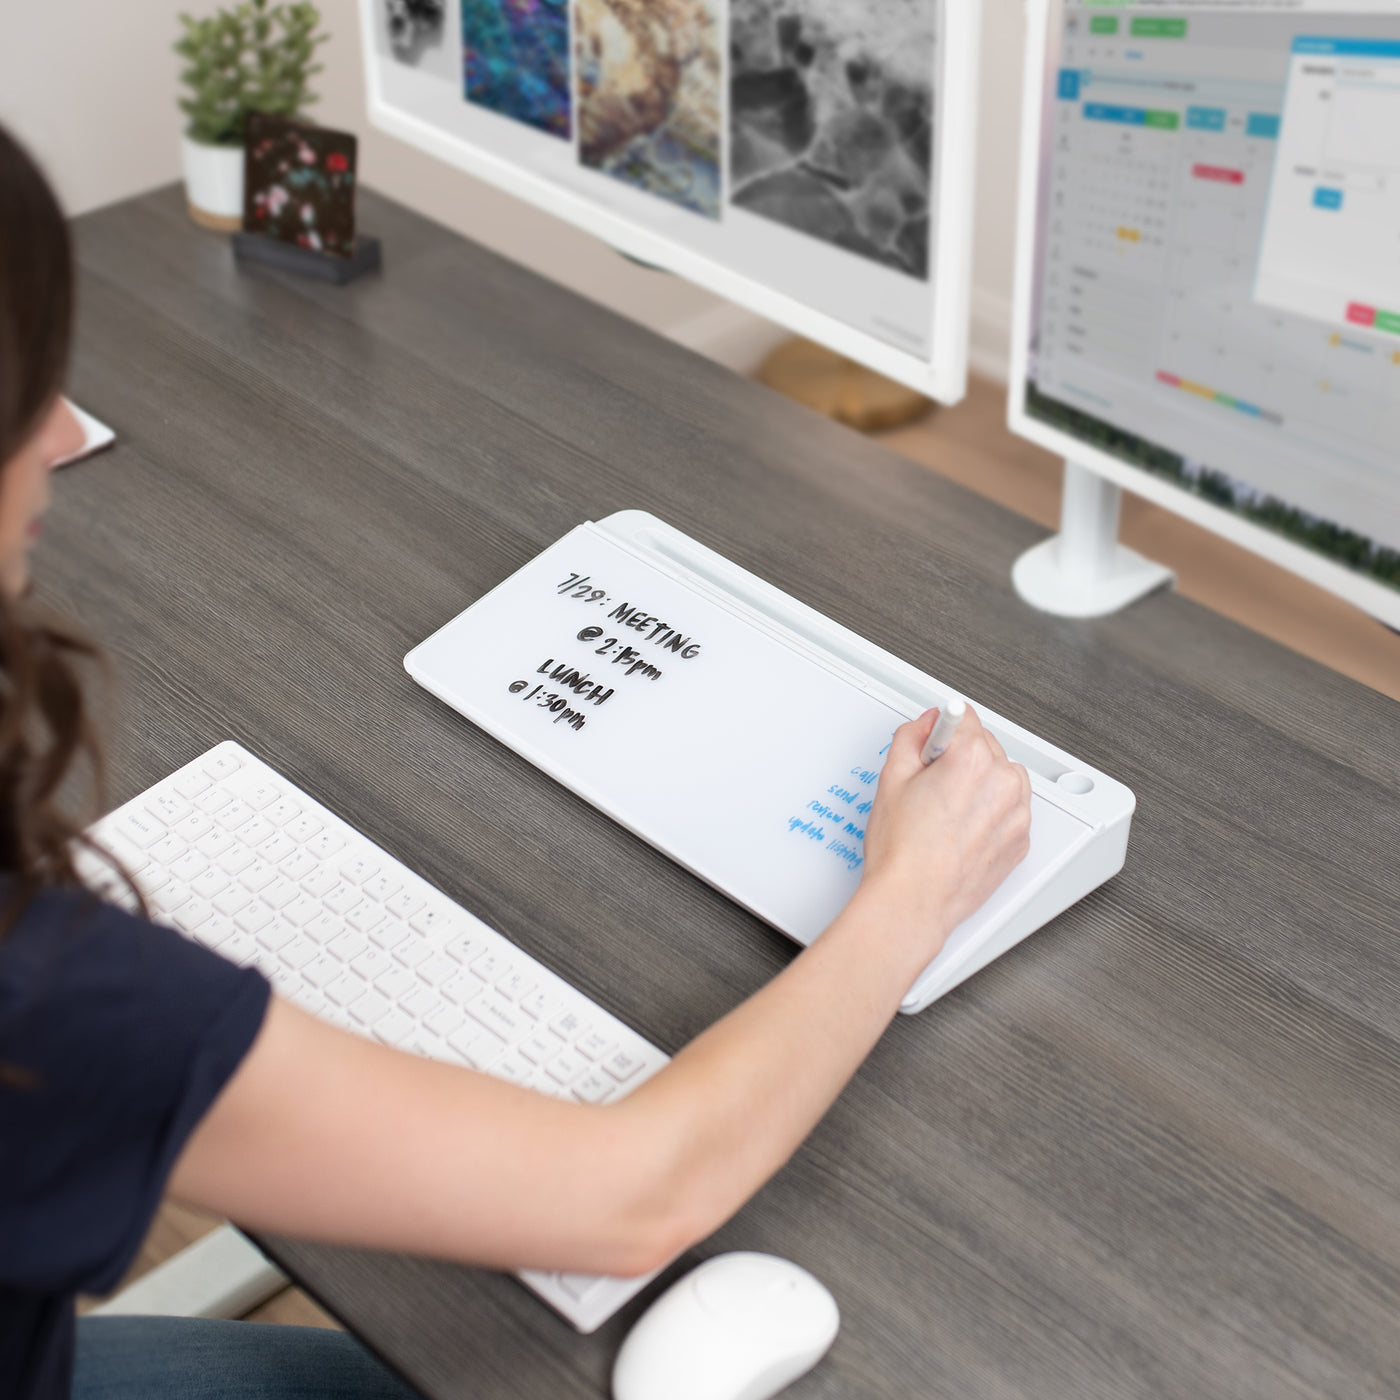  A desktop whiteboard with convenient reminders.